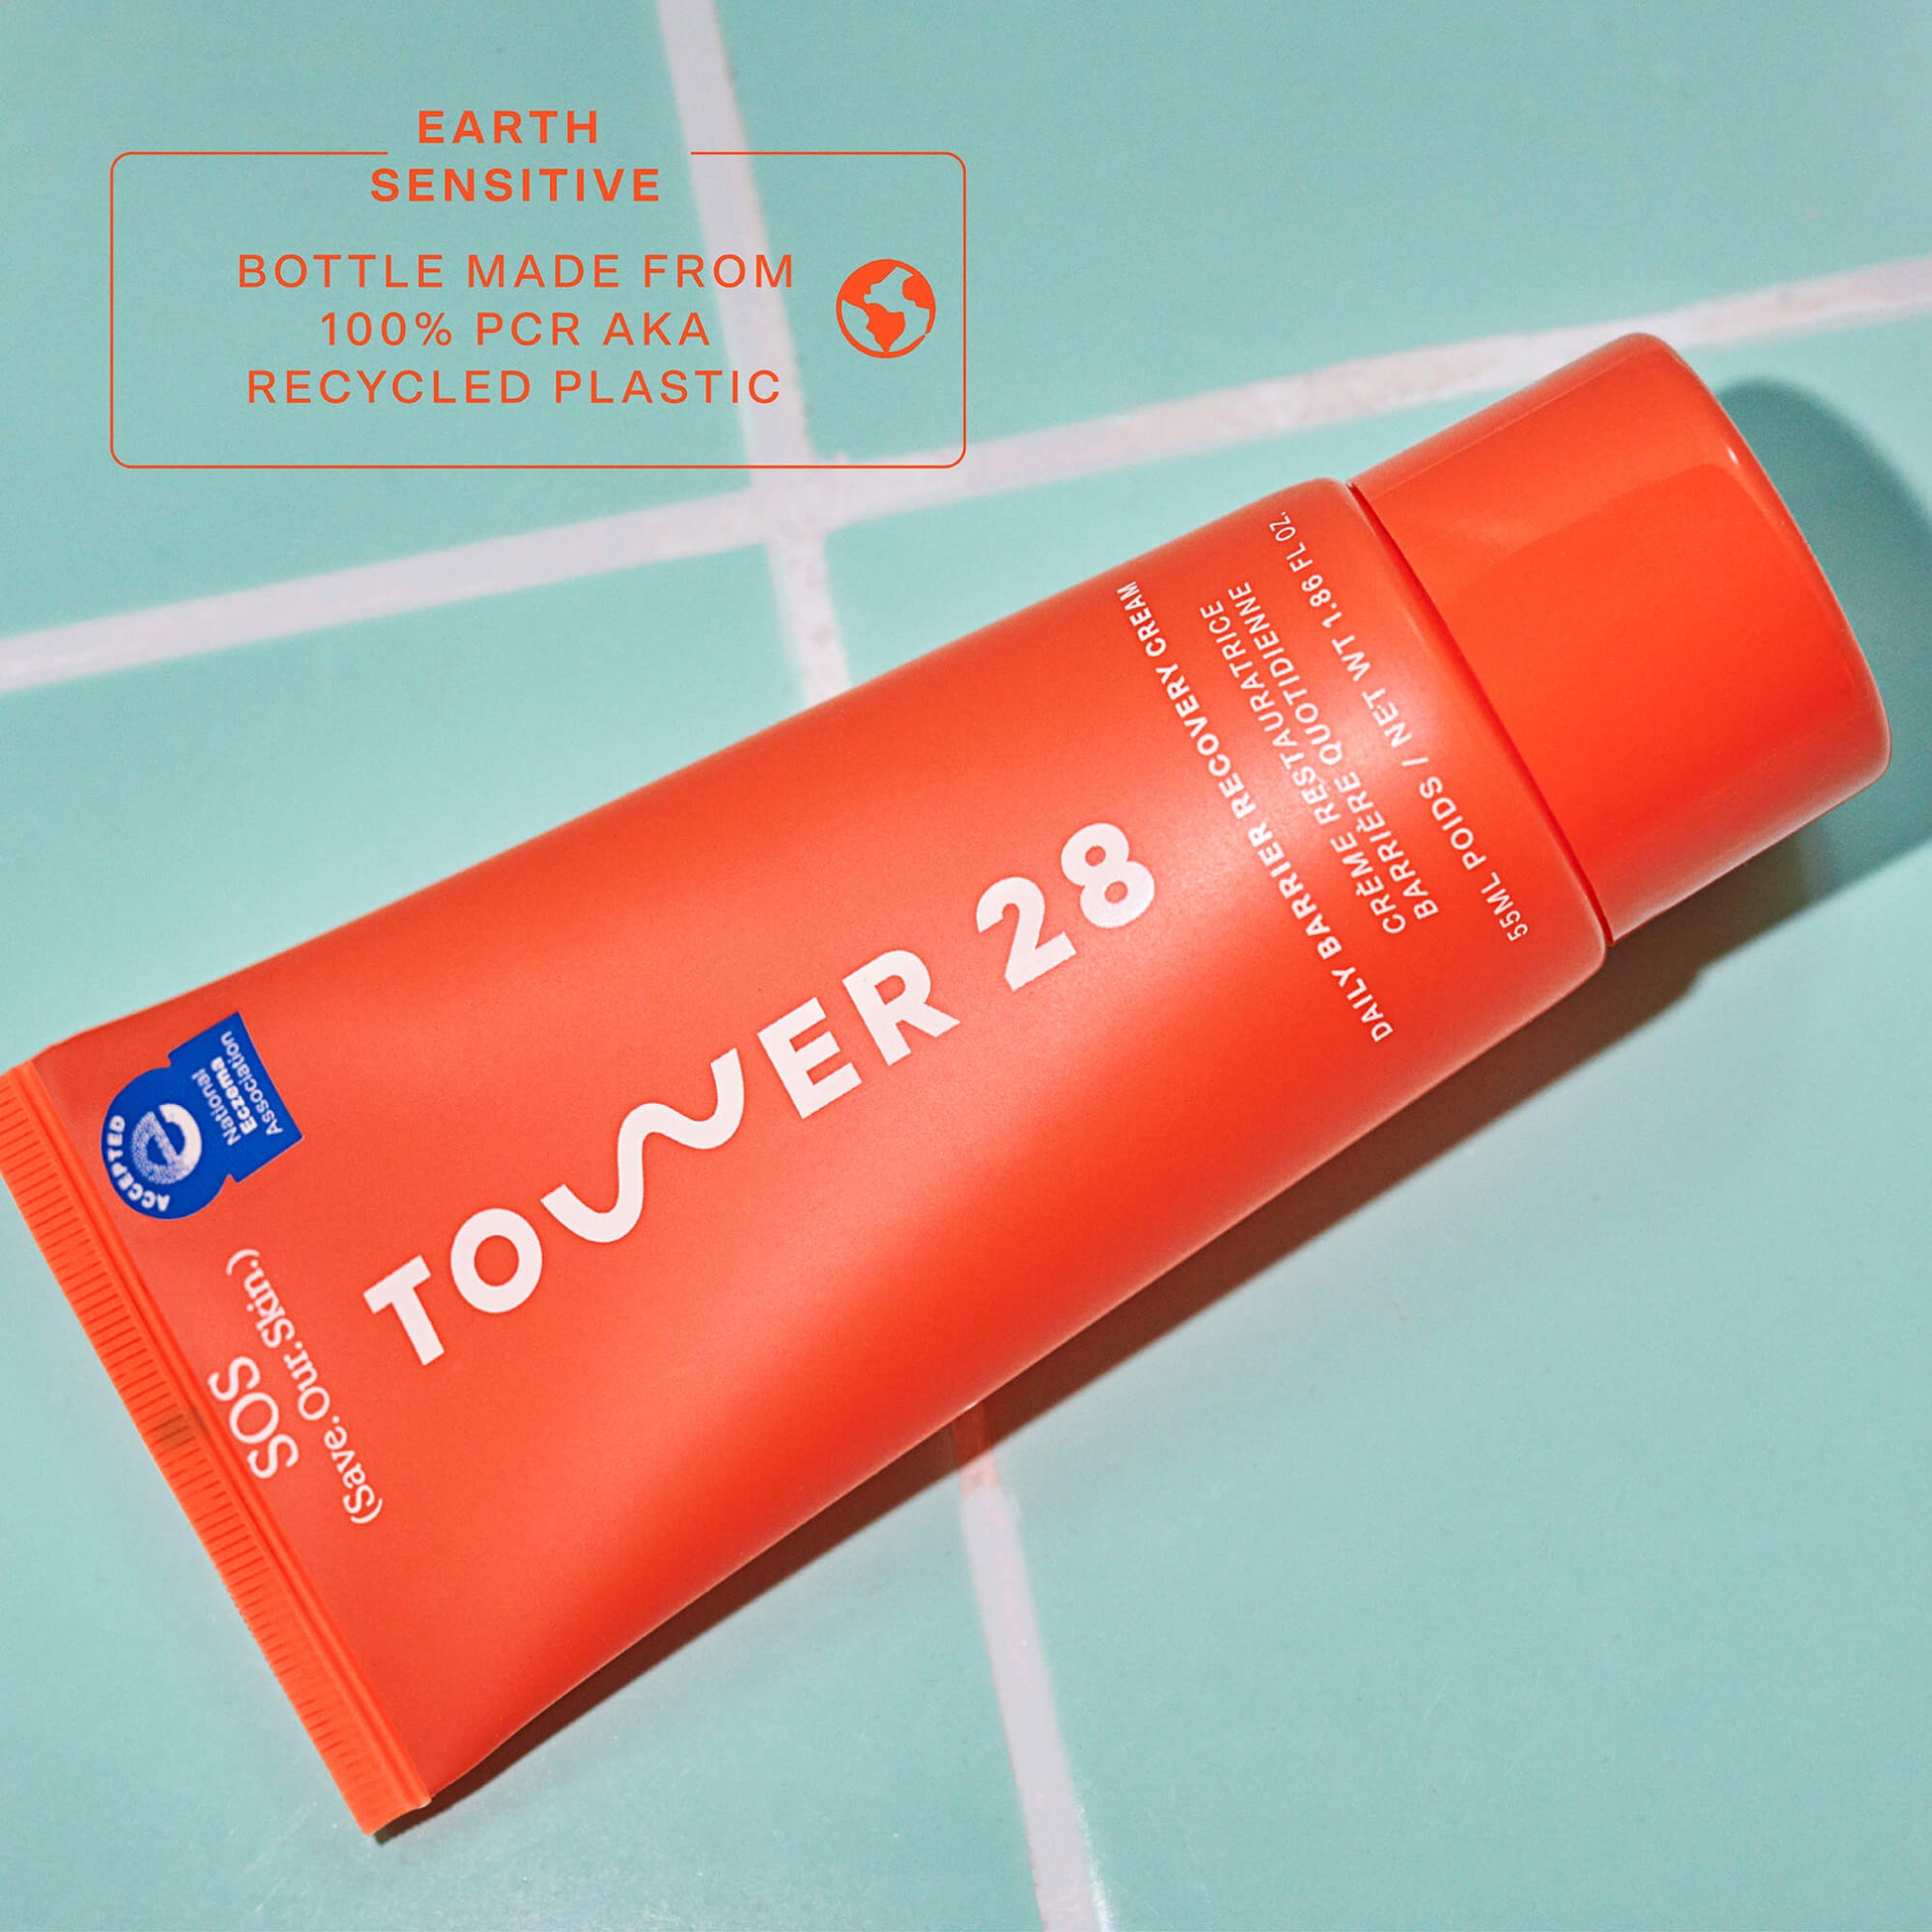 [Shared: Tower 28 Beauty SOS Recovery Cream bottle is made from 100% PCR aka recycled plastic